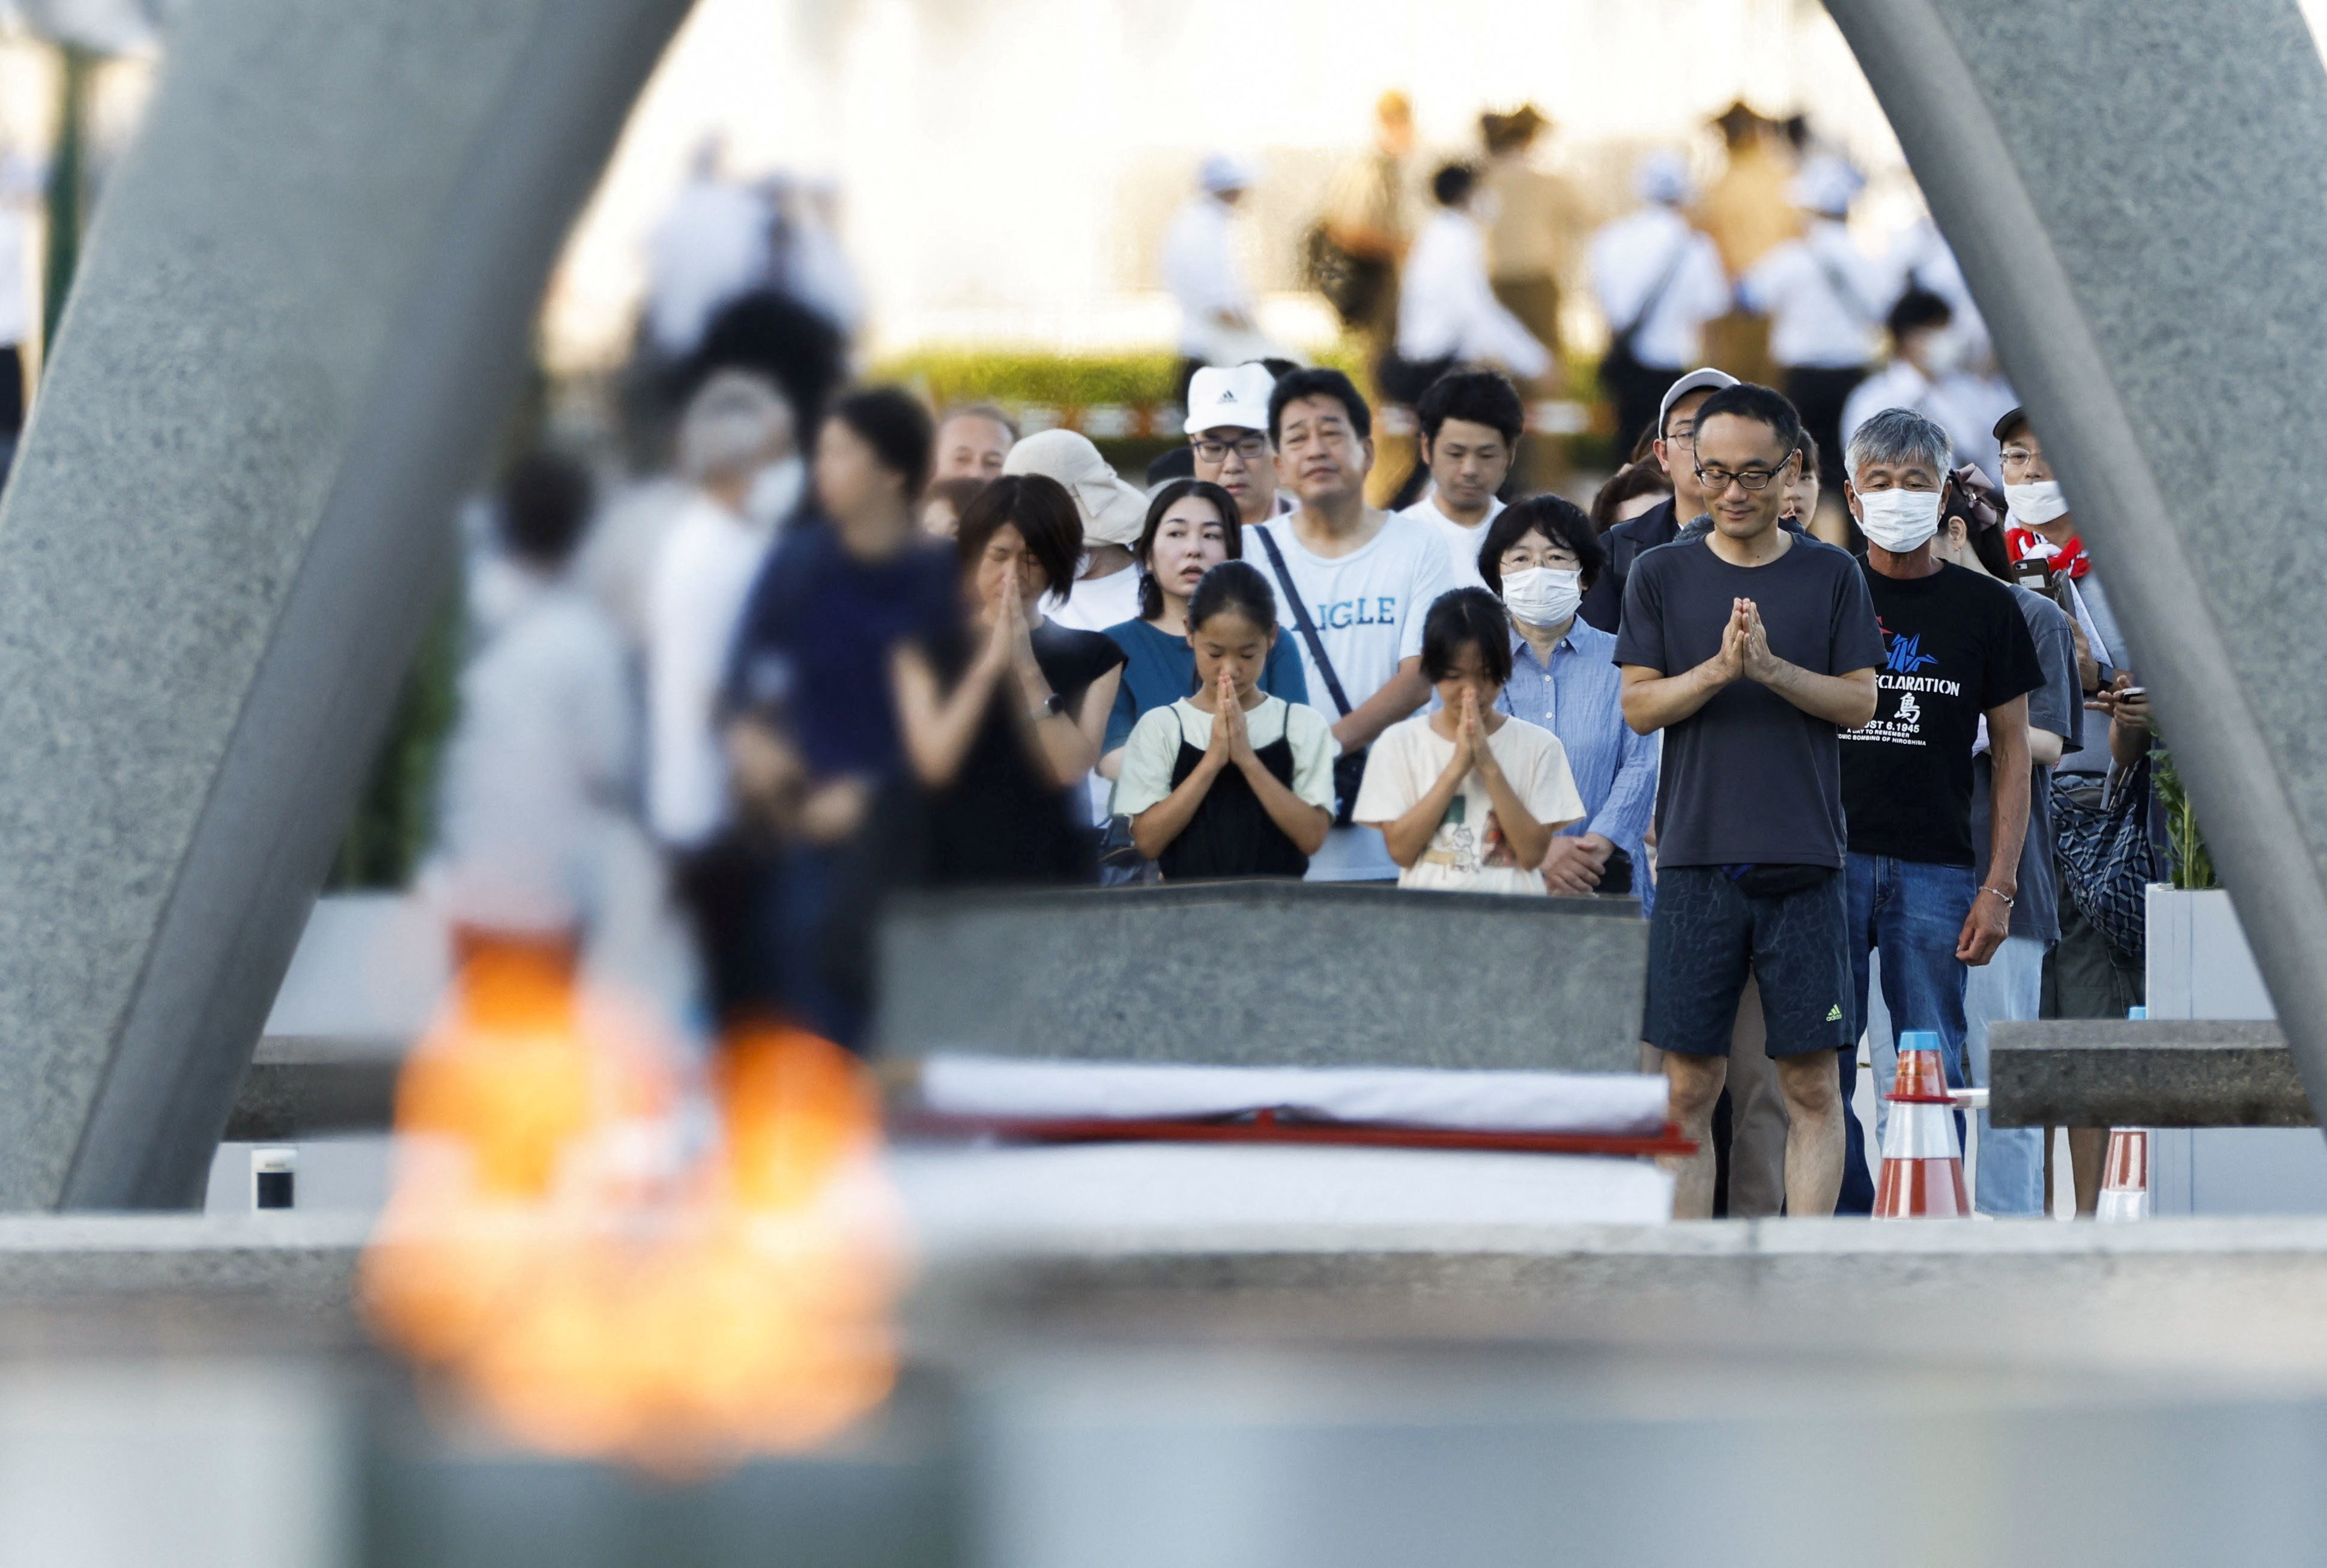 People pray in front of the cenotaph for the victims of the 1945 atomic bombing, on the anniversary of the world's first atomic bombing, at Peace Memorial Park in Hiroshima